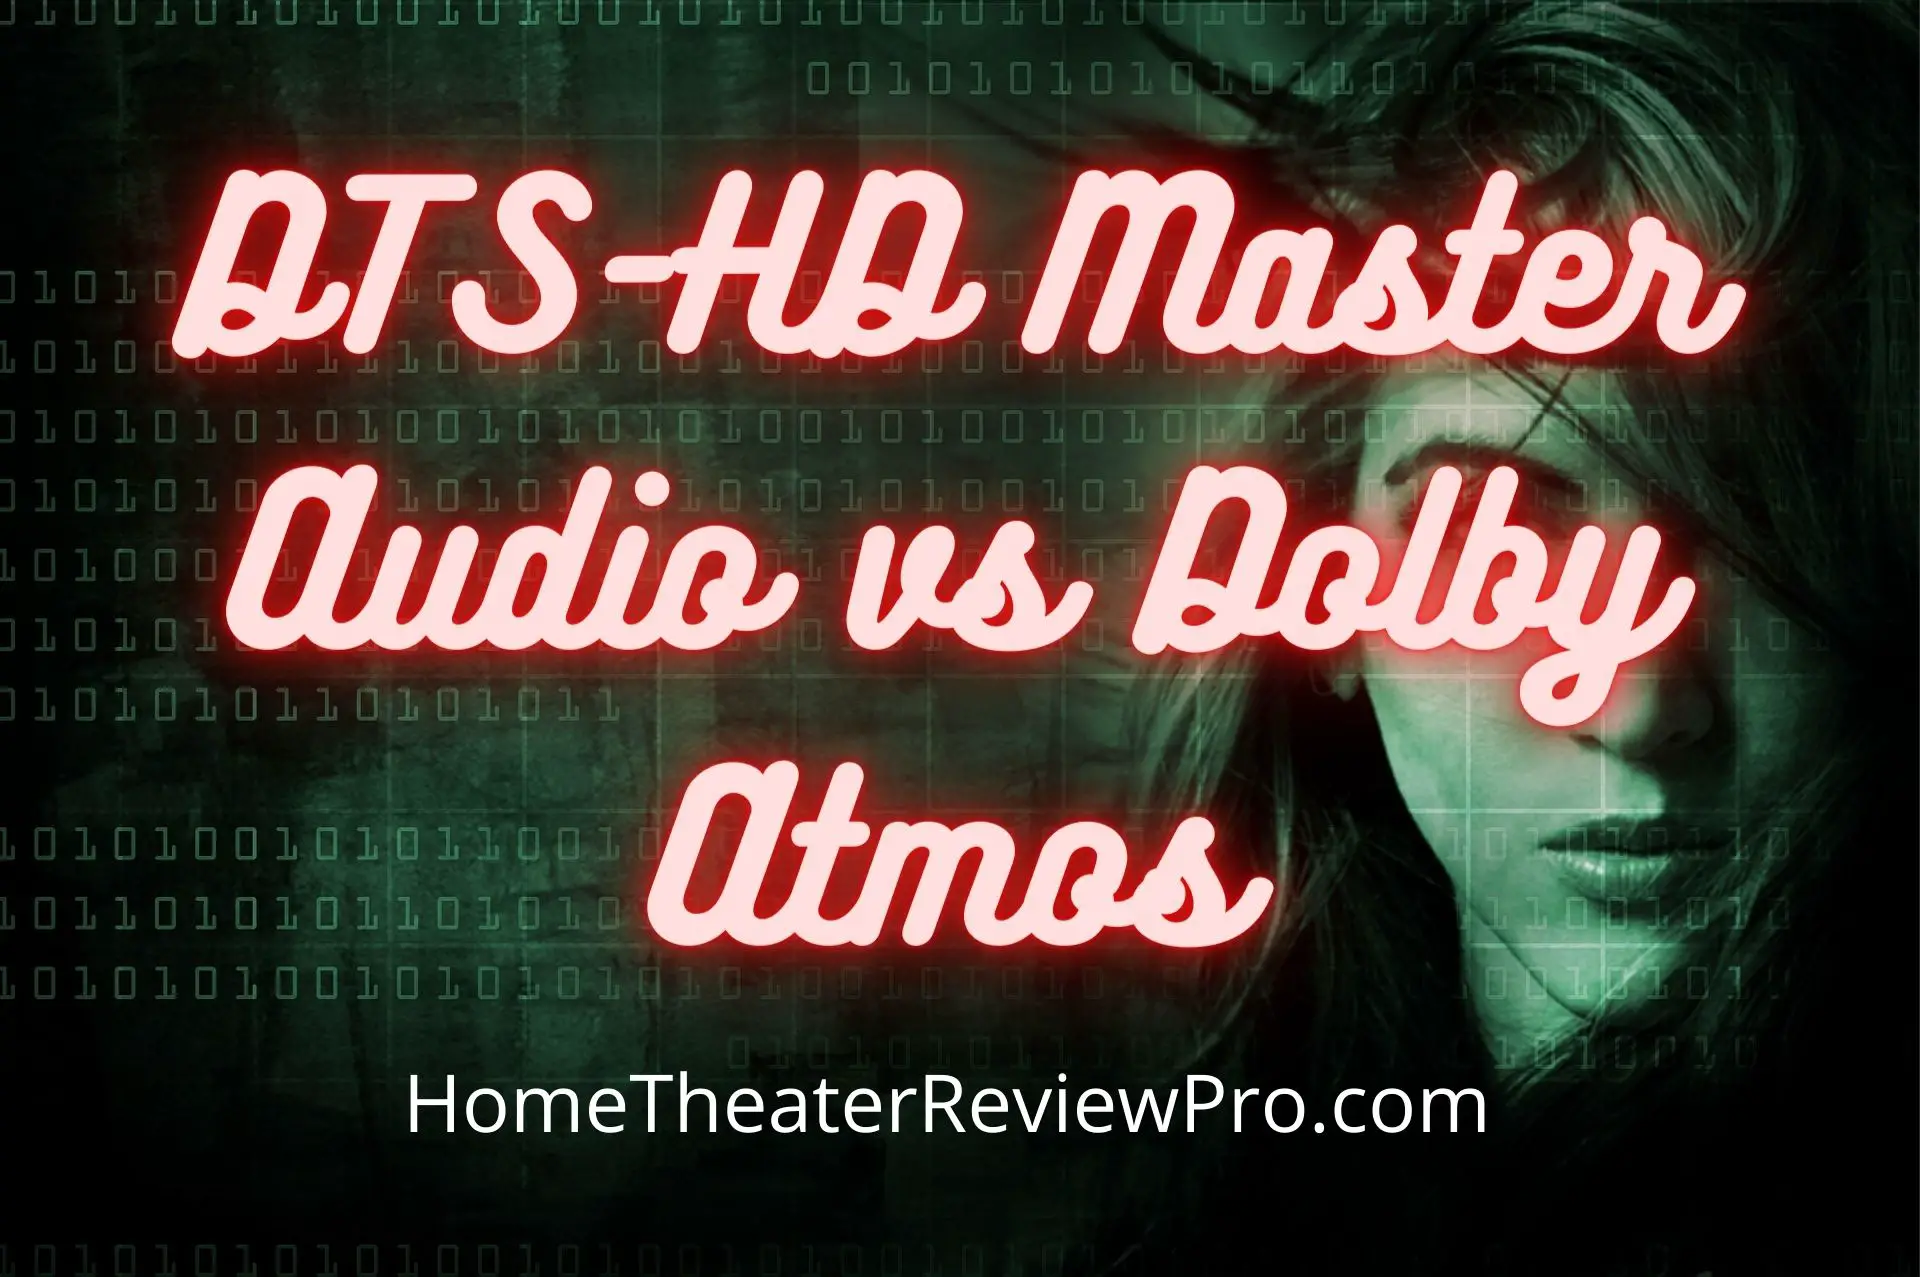 dts-hd master audio vs dolby atmos